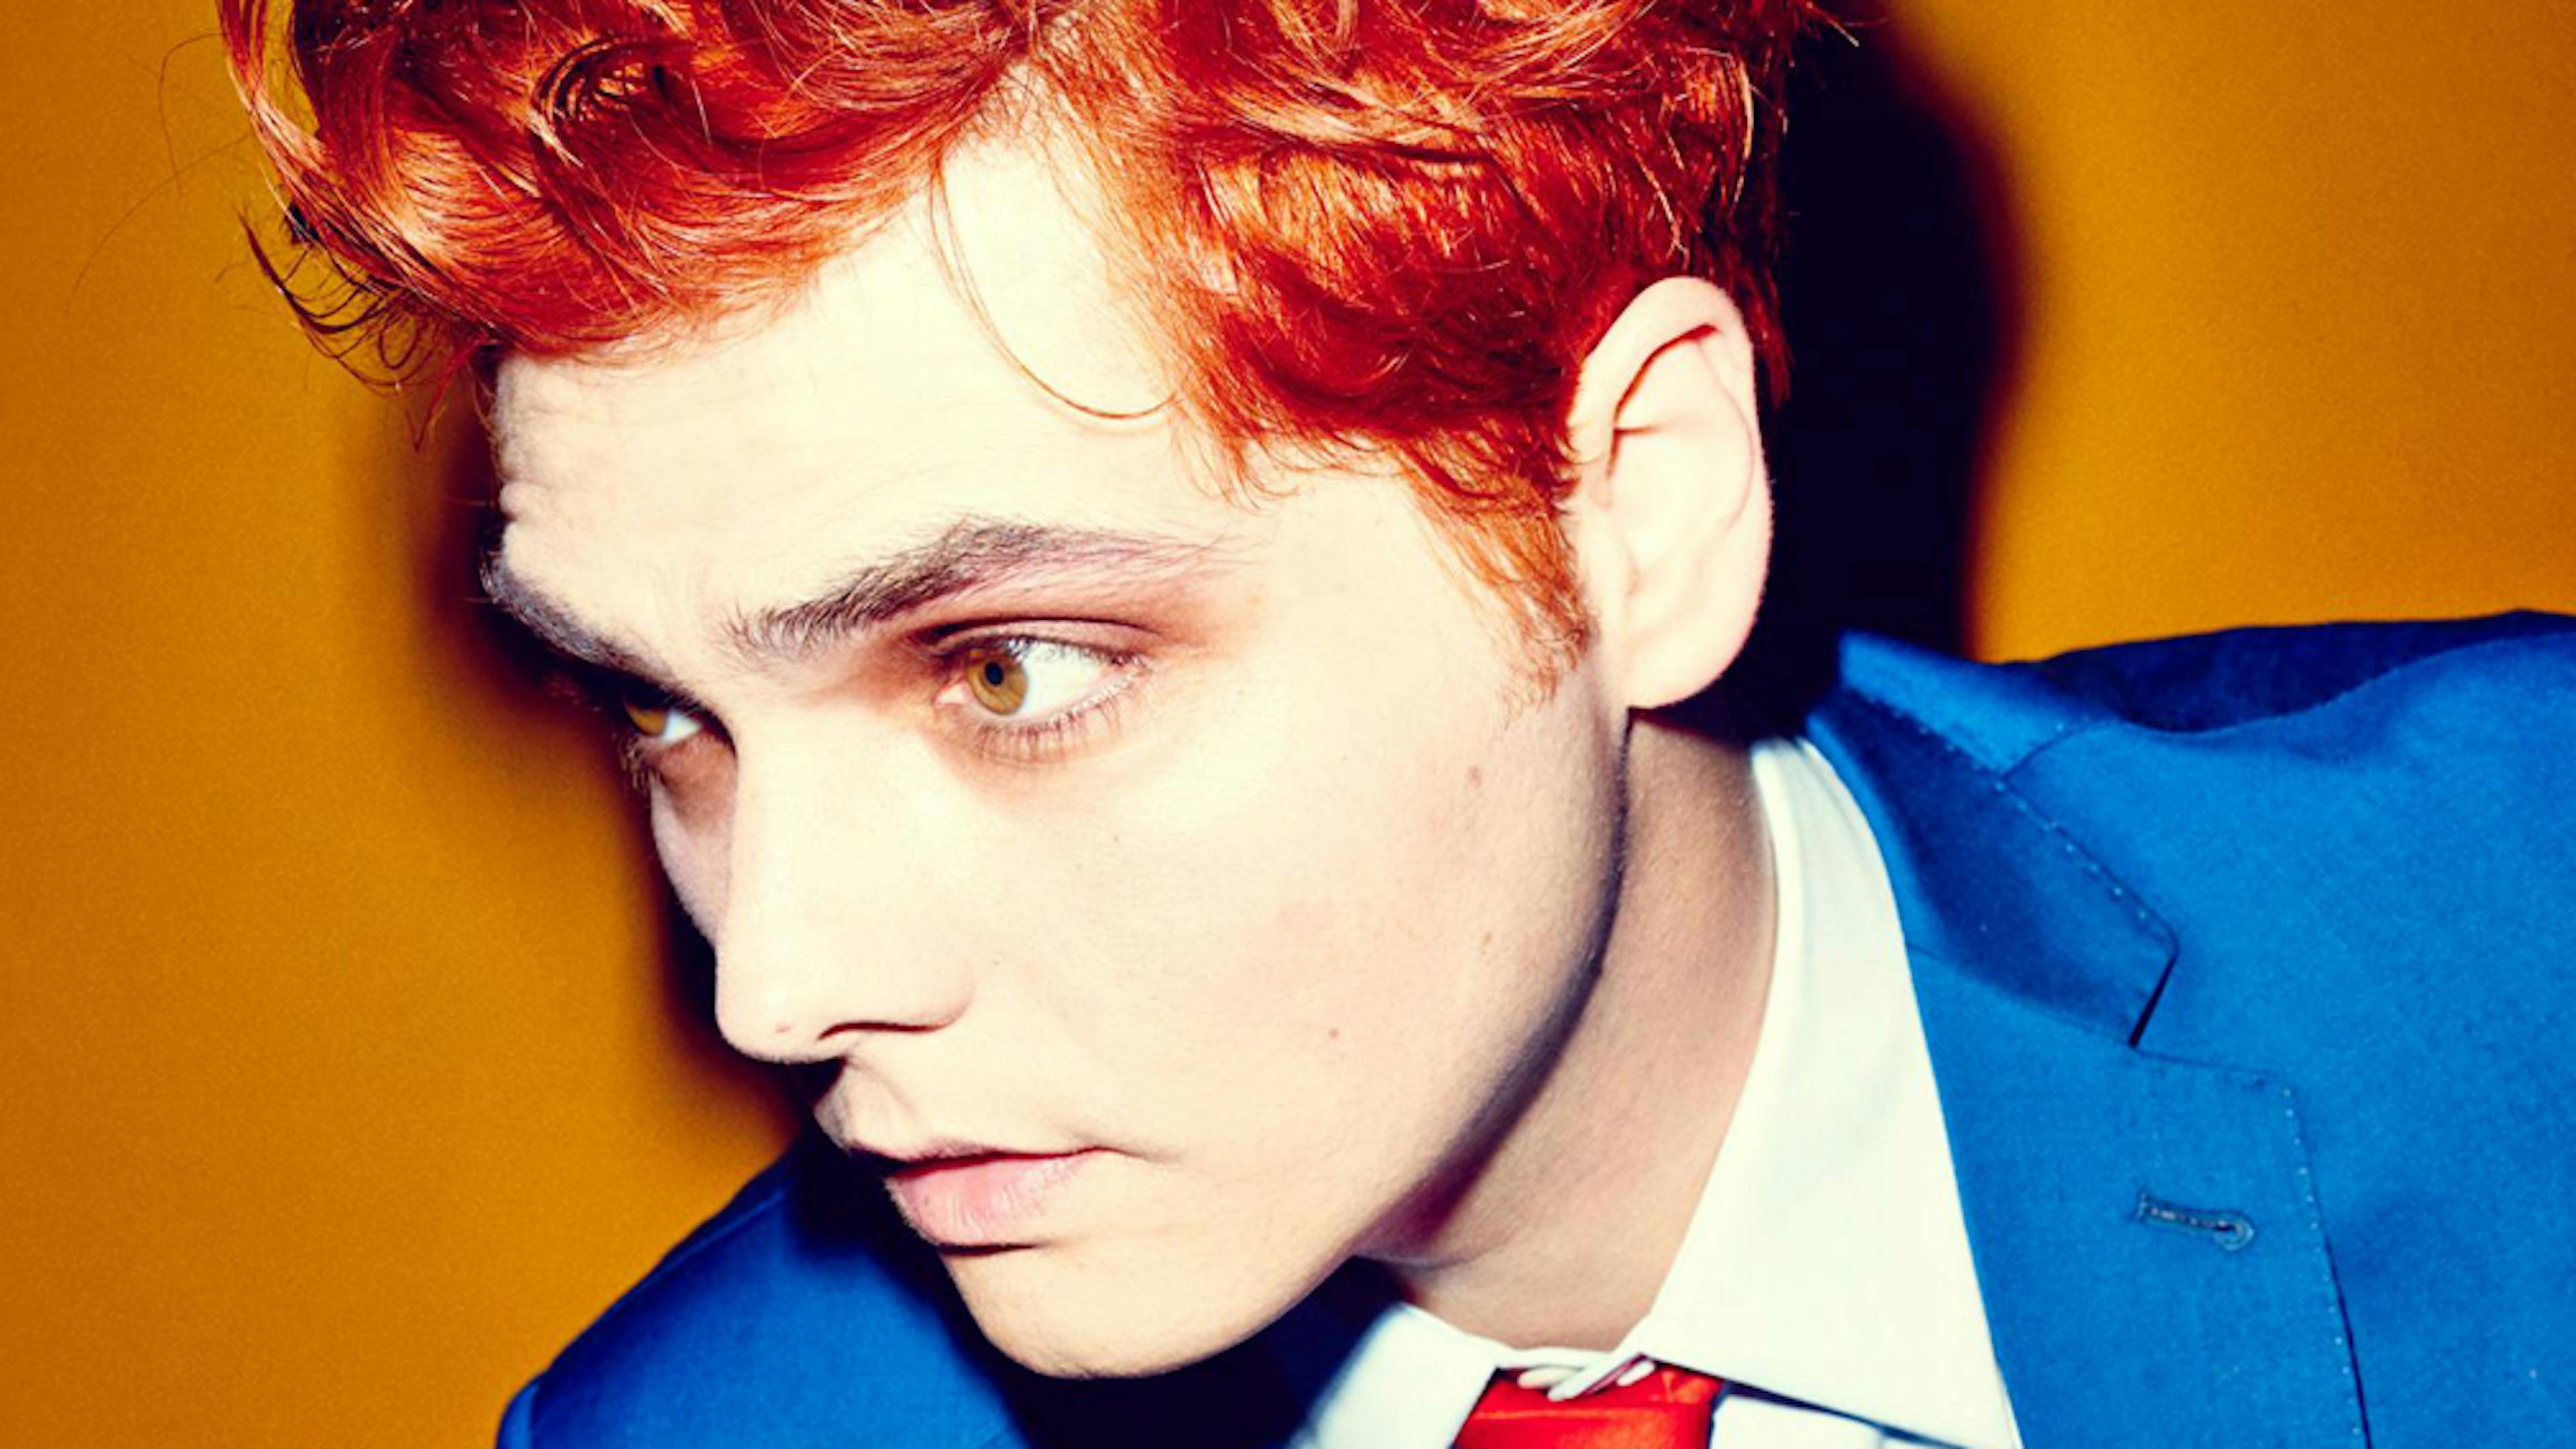 Gerard Way: "We’re All Screwed Up And We’ll Have An Easier Time If We Do This Together"